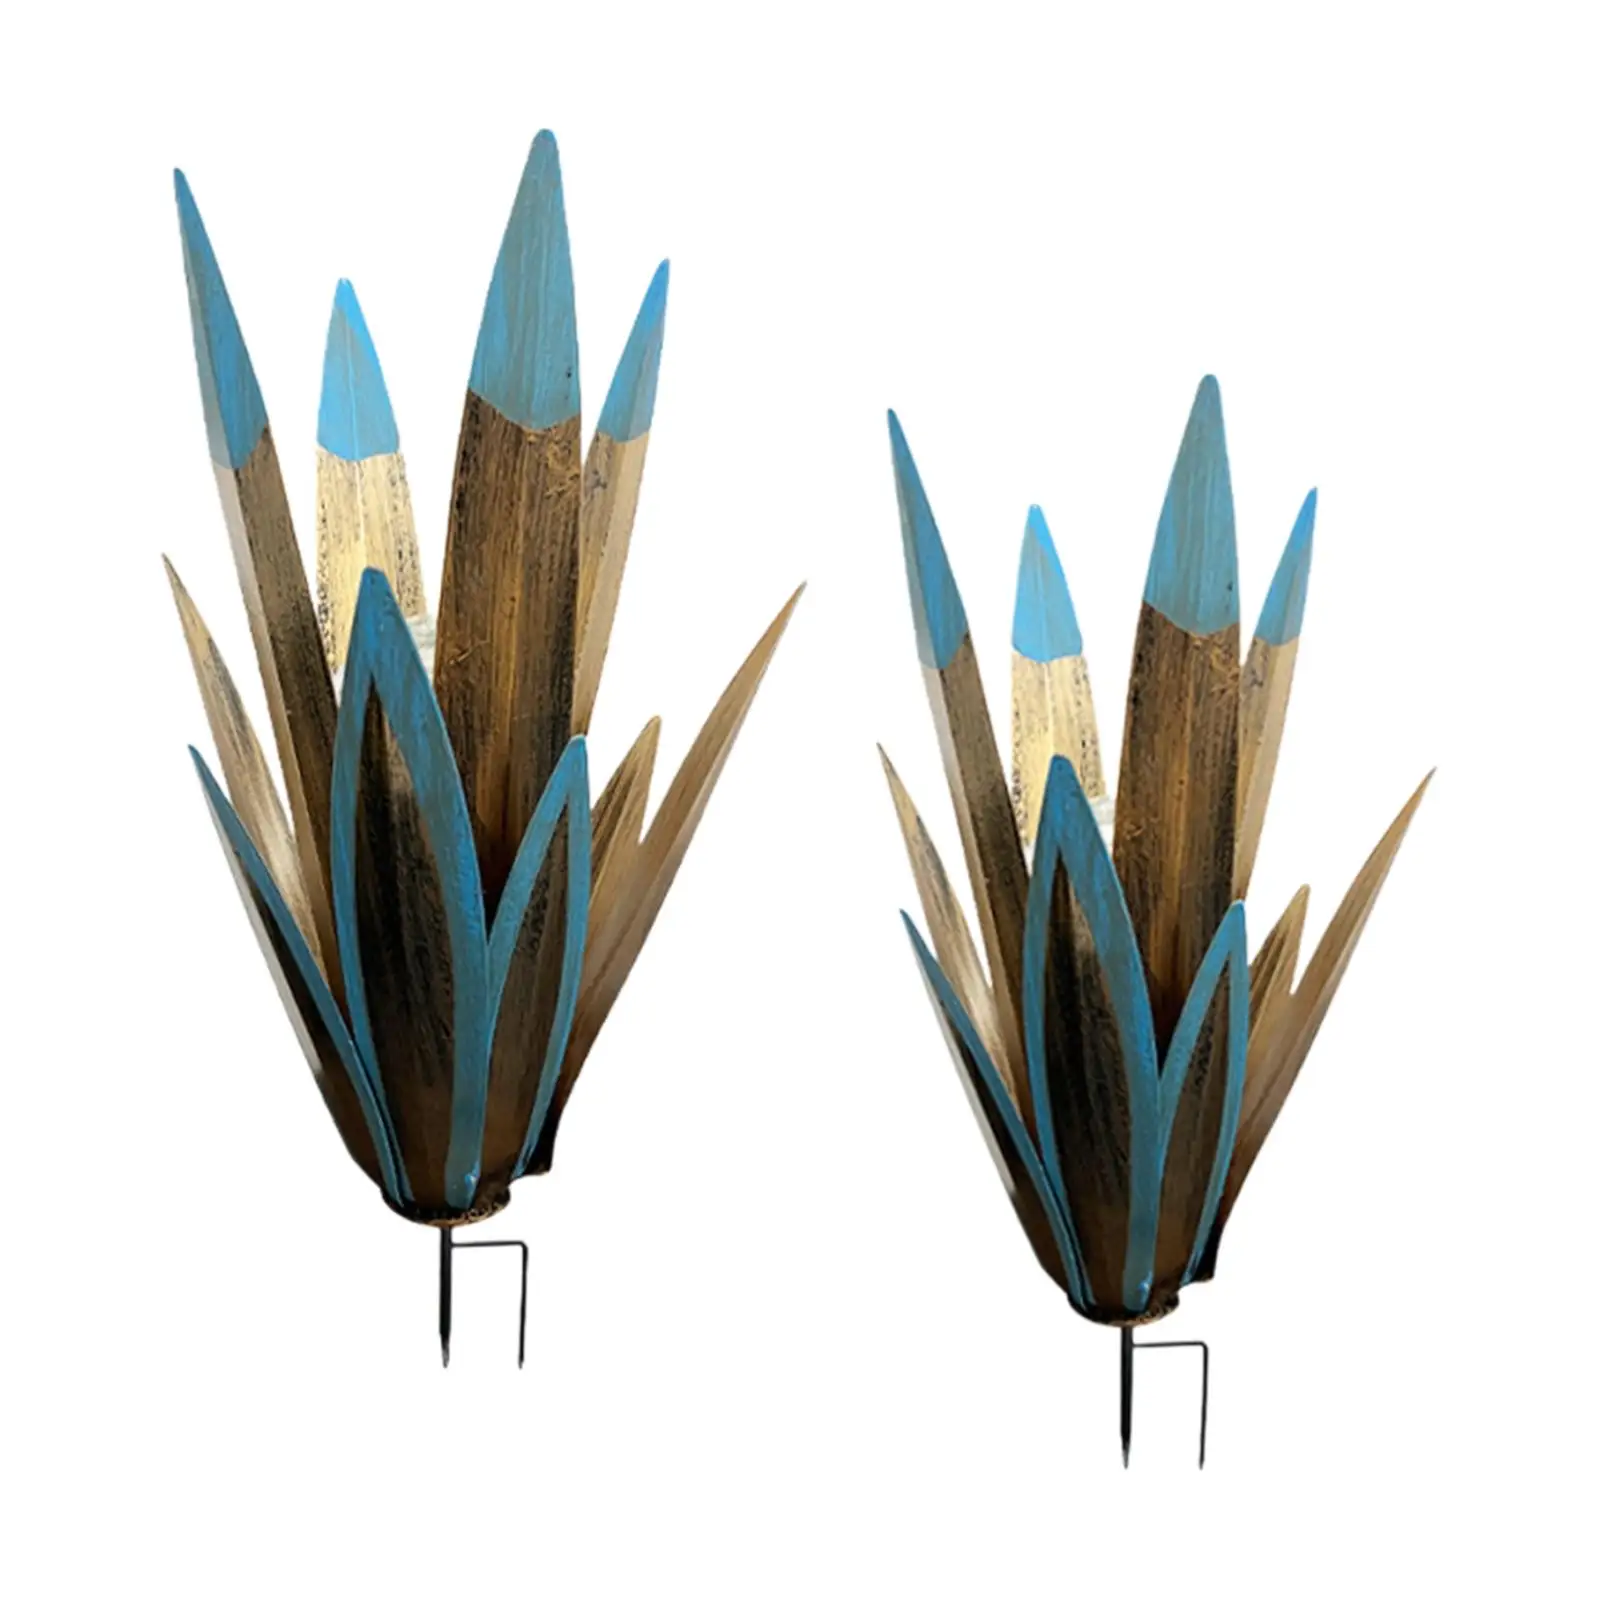 

2x Metal Agave Plant Home Decor with Solar Light Realistic Yard Decoration Outdoor Statue Decorative Stake for Outside Lawn Yard